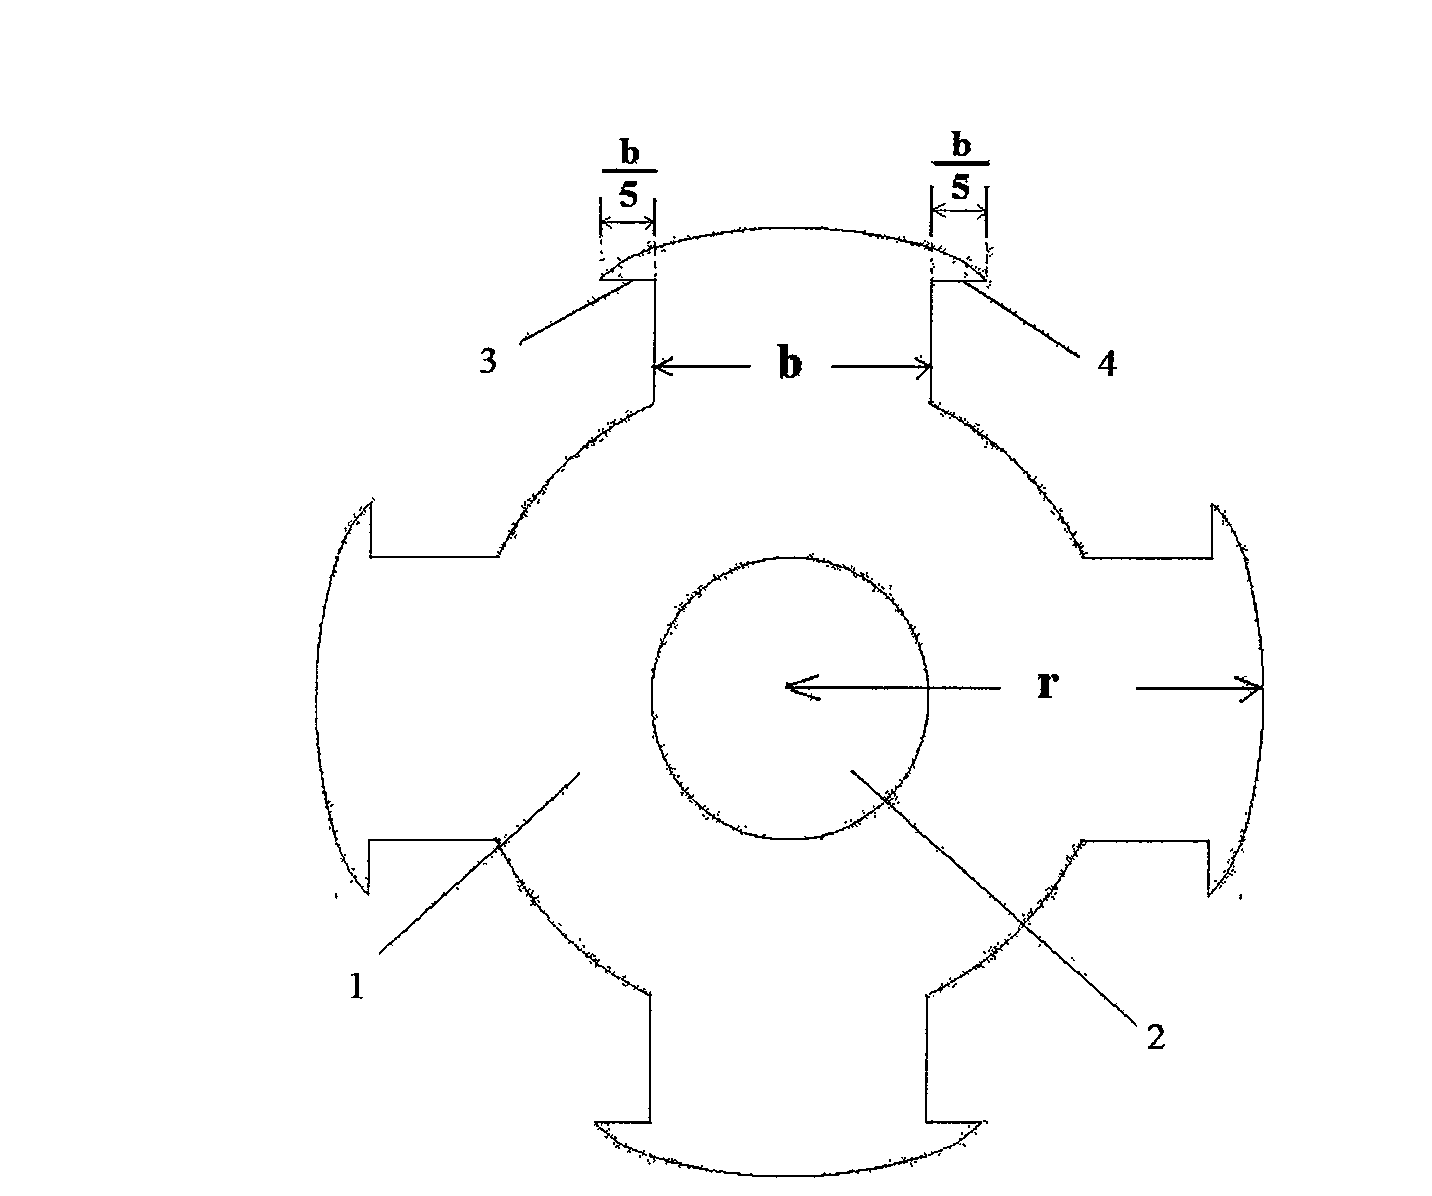 Rotor structure of switched reluctance motor for reducing vibration and noise